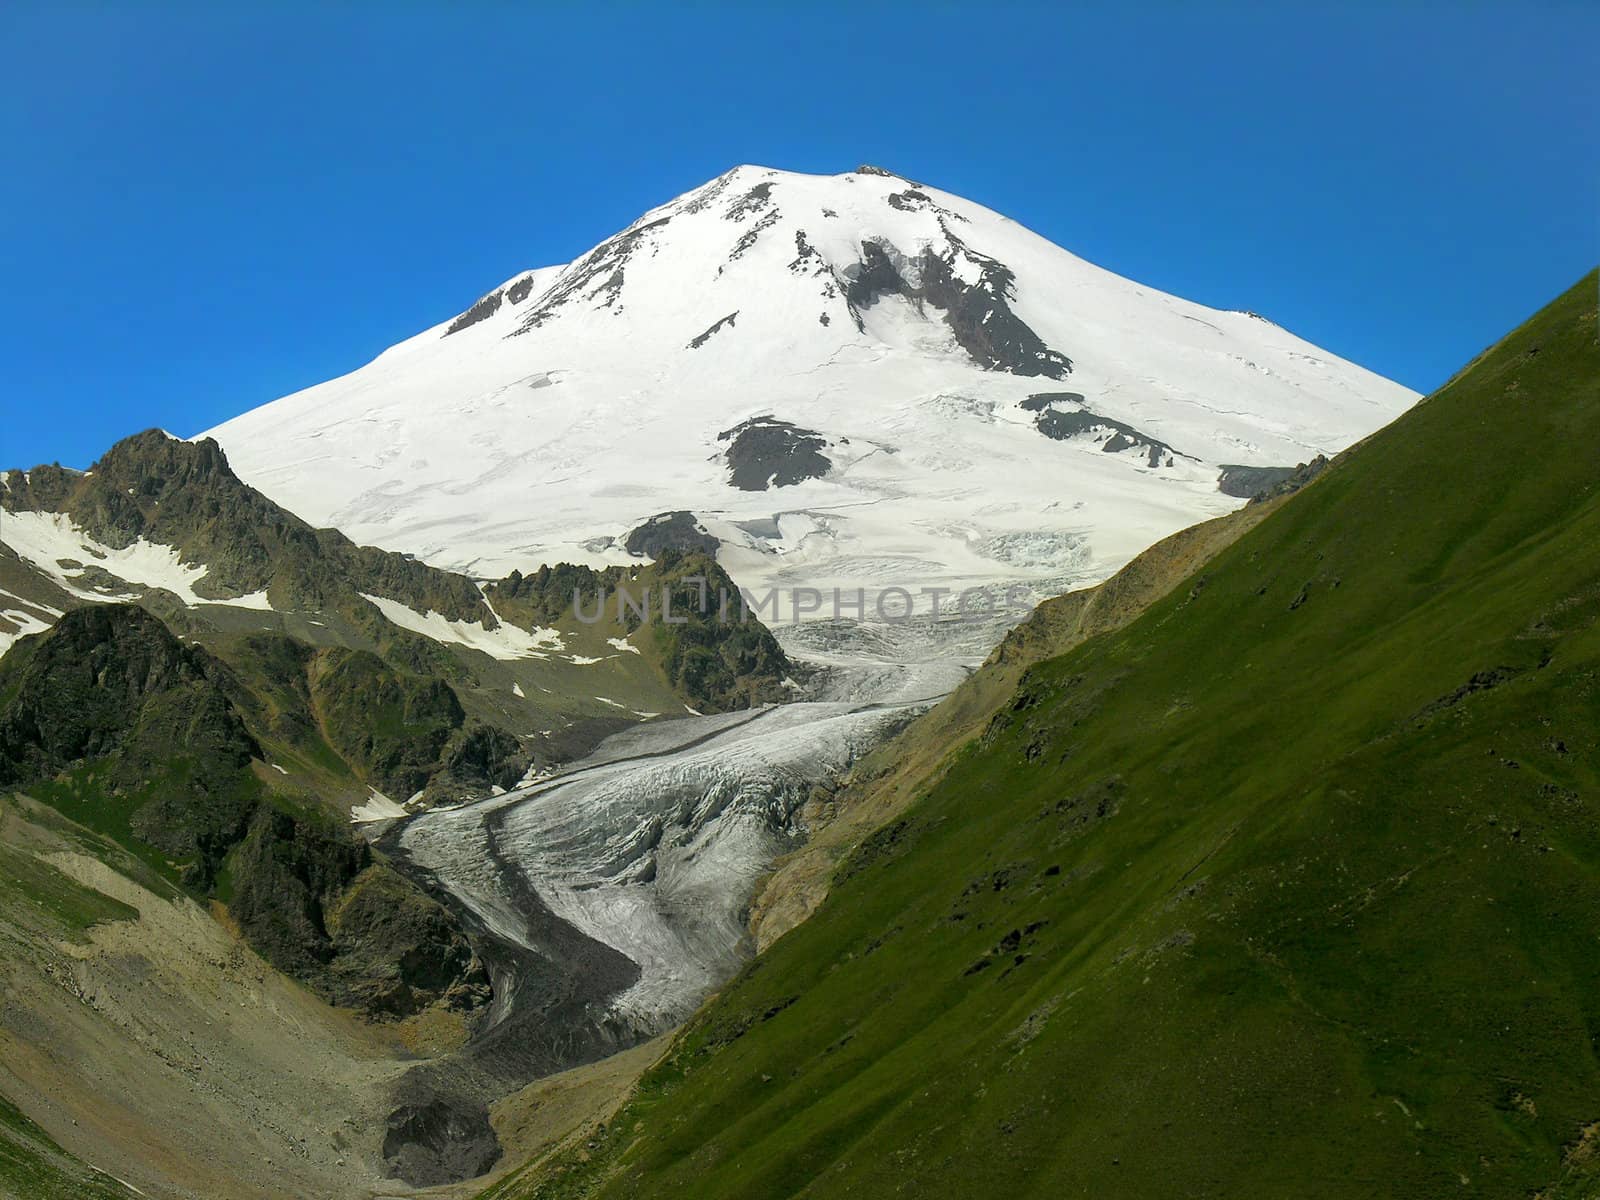  Snow-covered top of mountain on a background of the blue sky
         